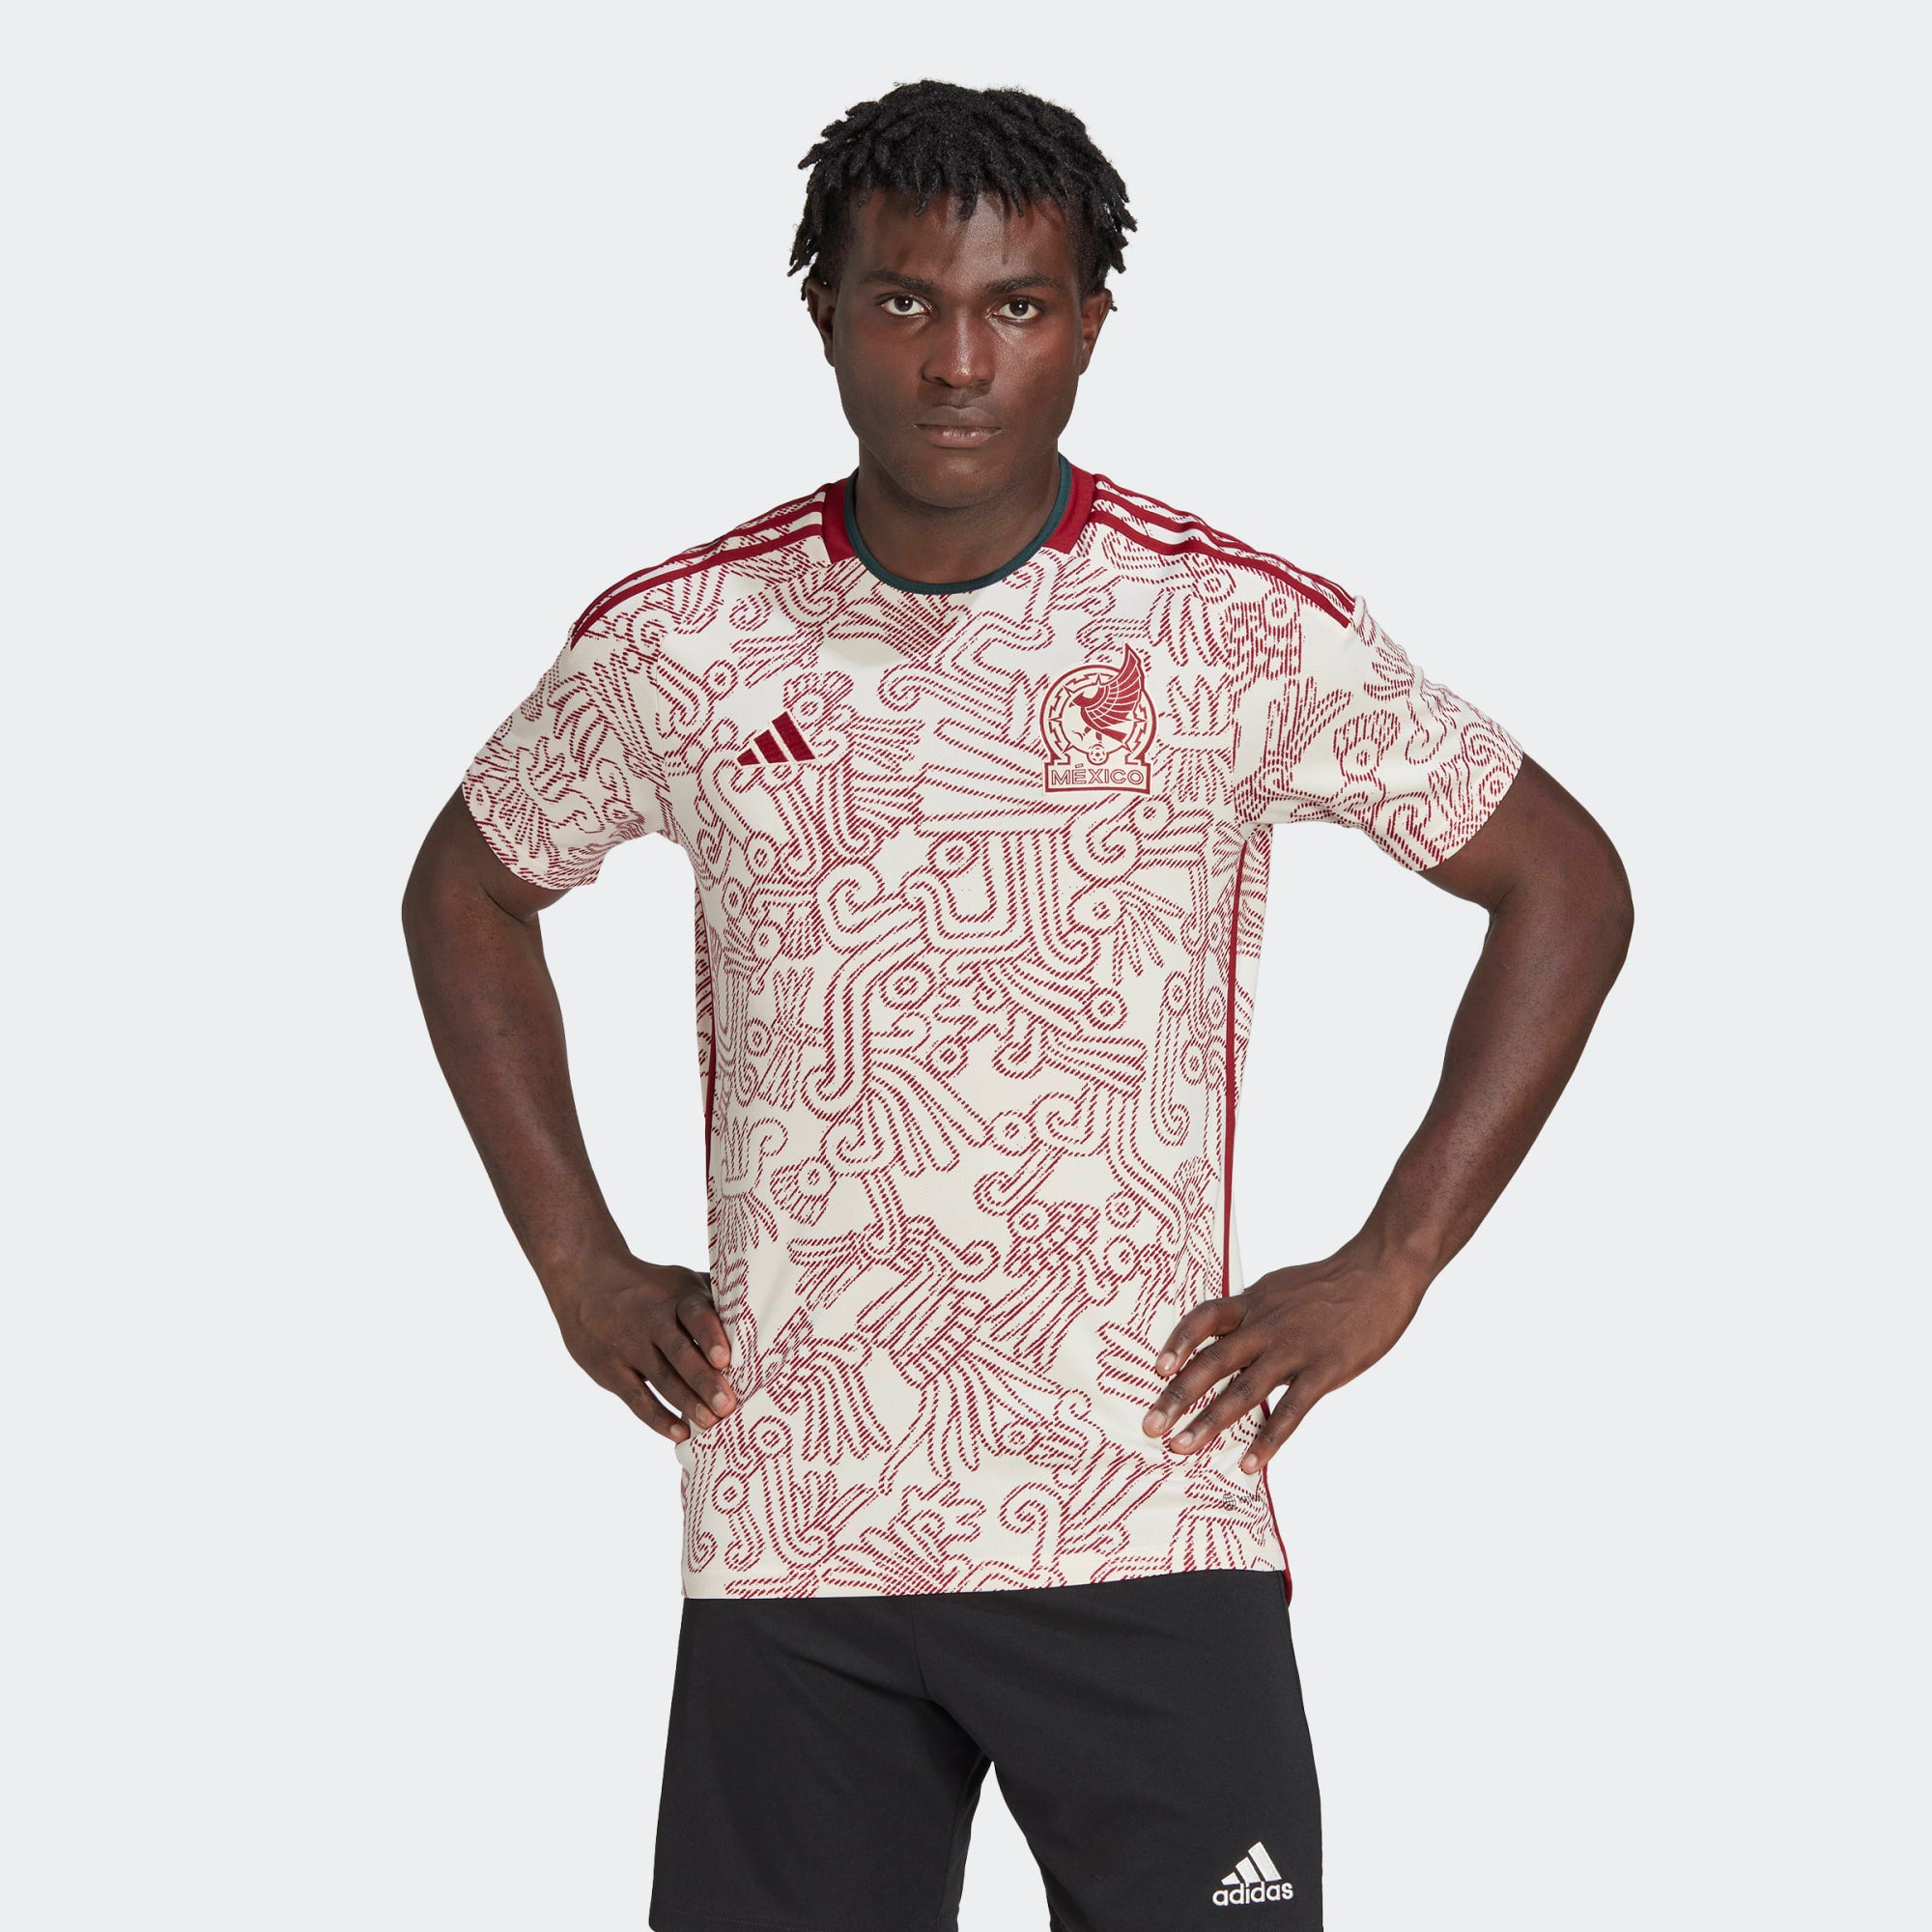 mexico soccer jersey official